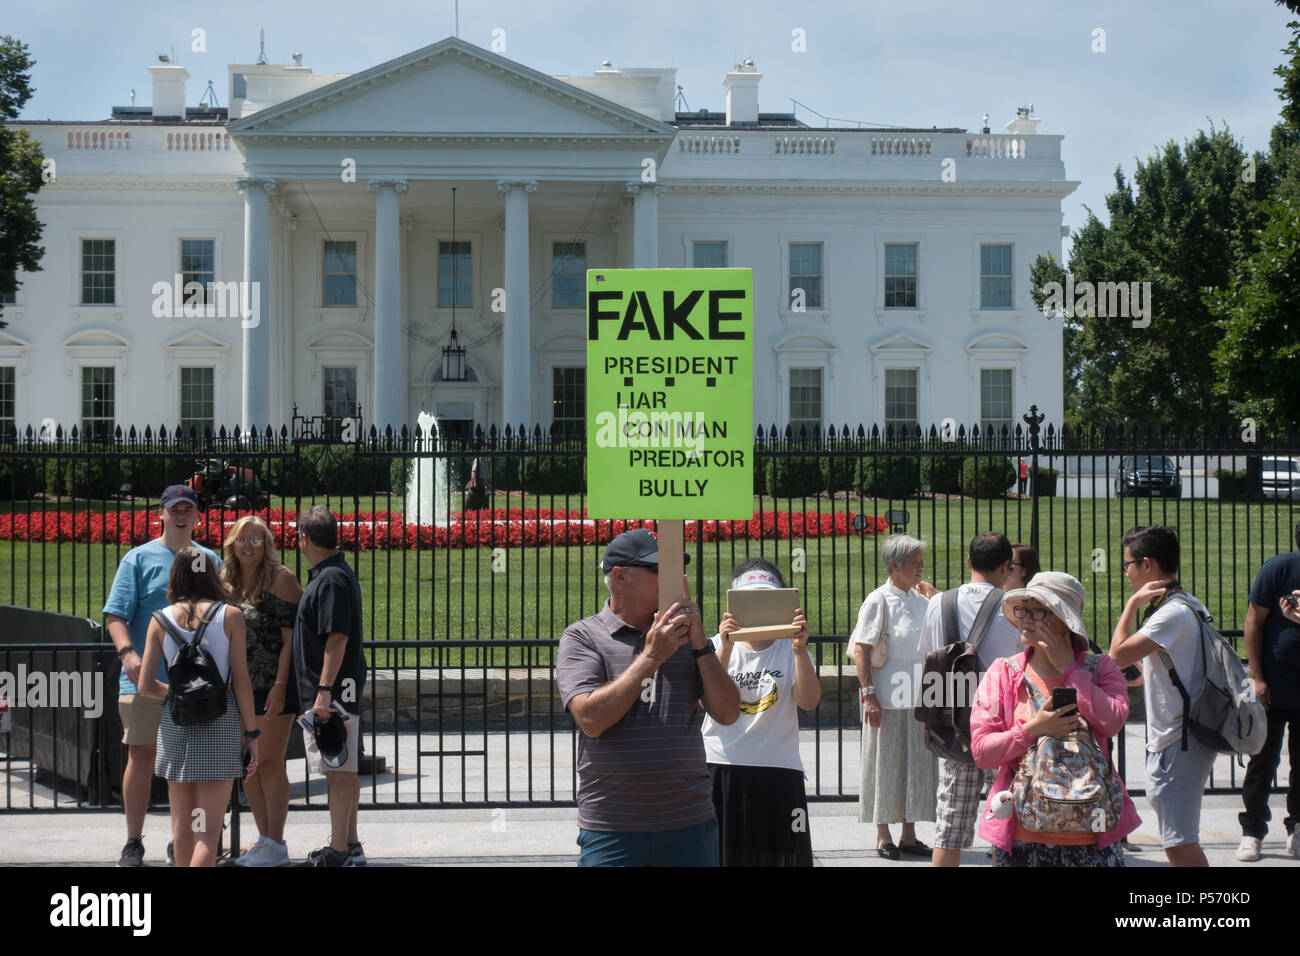 Anti-Trump Picket at White House; placard indicating President Trump's characteristics: liar, con man, predator, bully. June 25, 2017. Tourists nearby Stock Photo